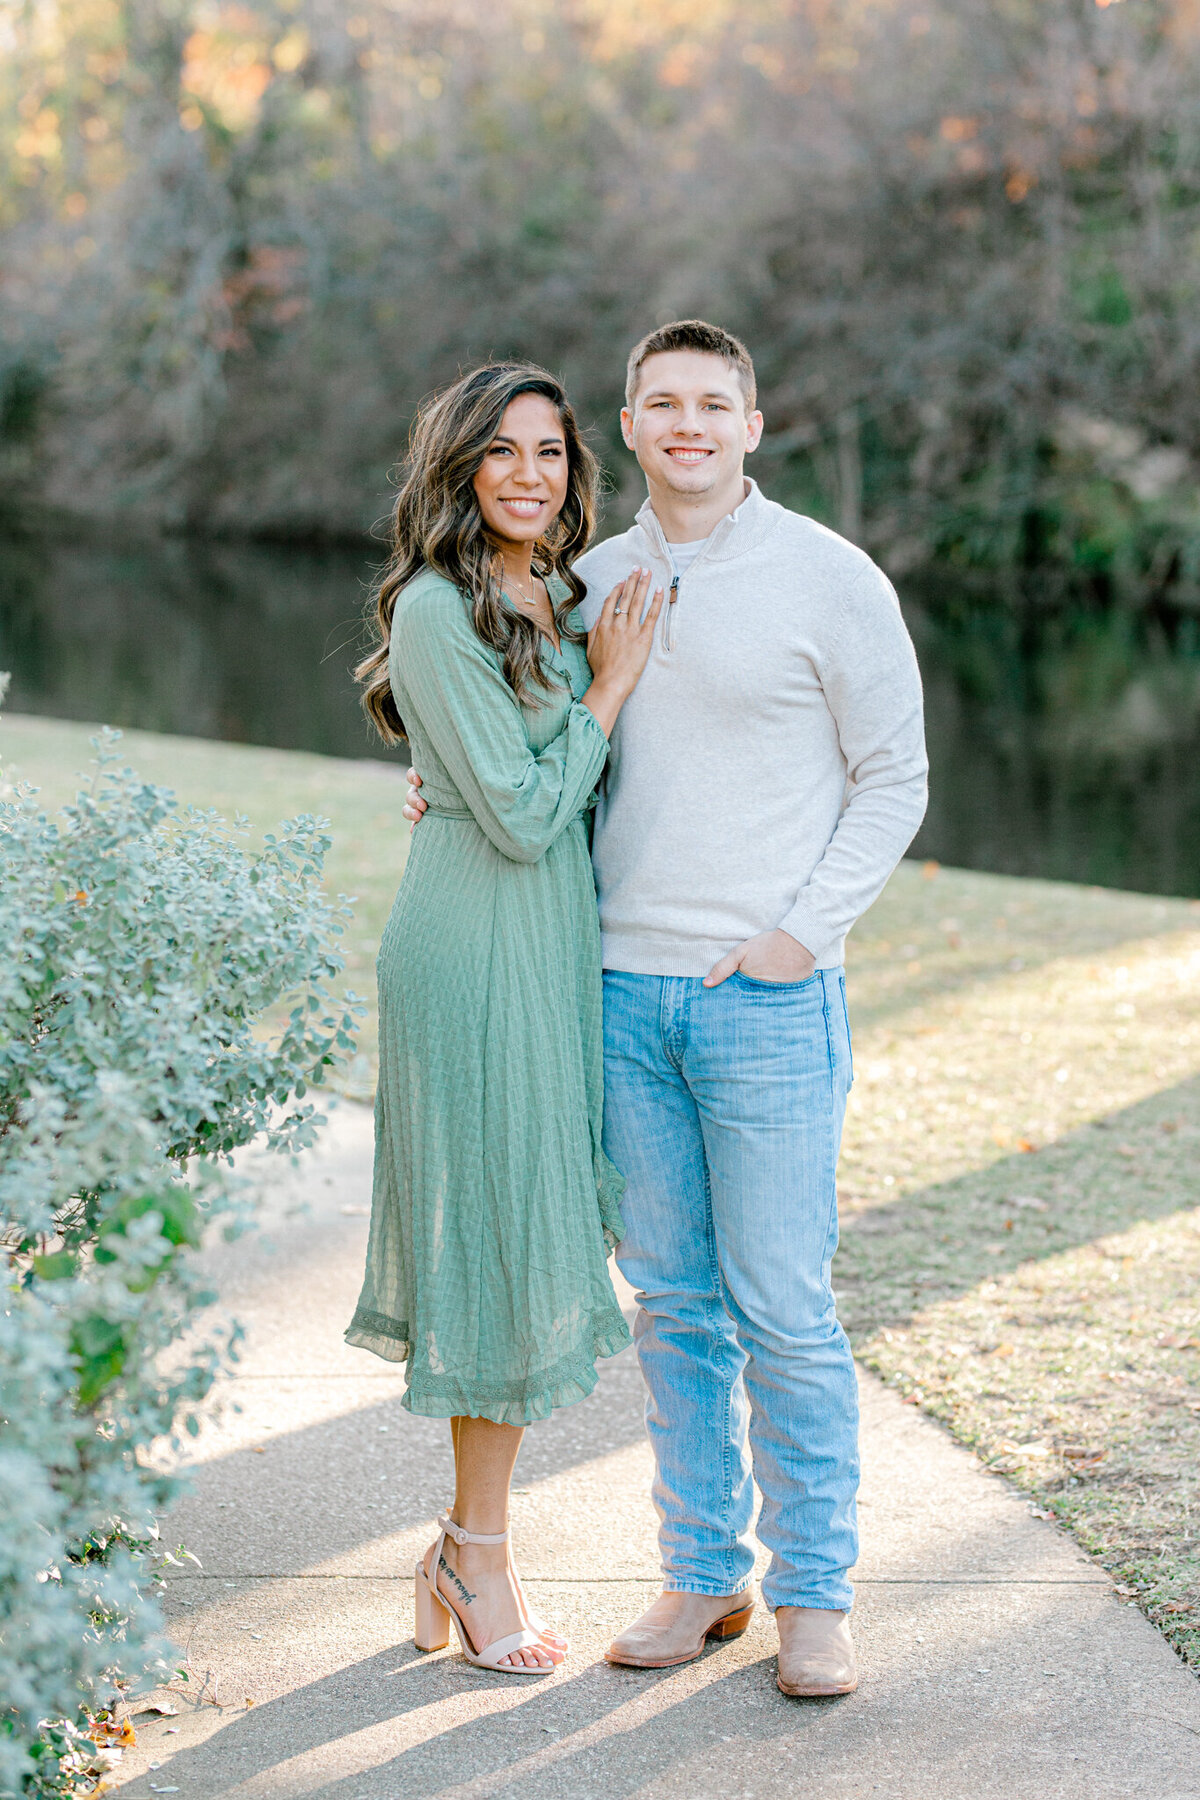 Jasmine & Hayden Engagement Session at Lakeside Park | Dallas Wedding and Portrait Photography | Sami Kathryn Photography-1